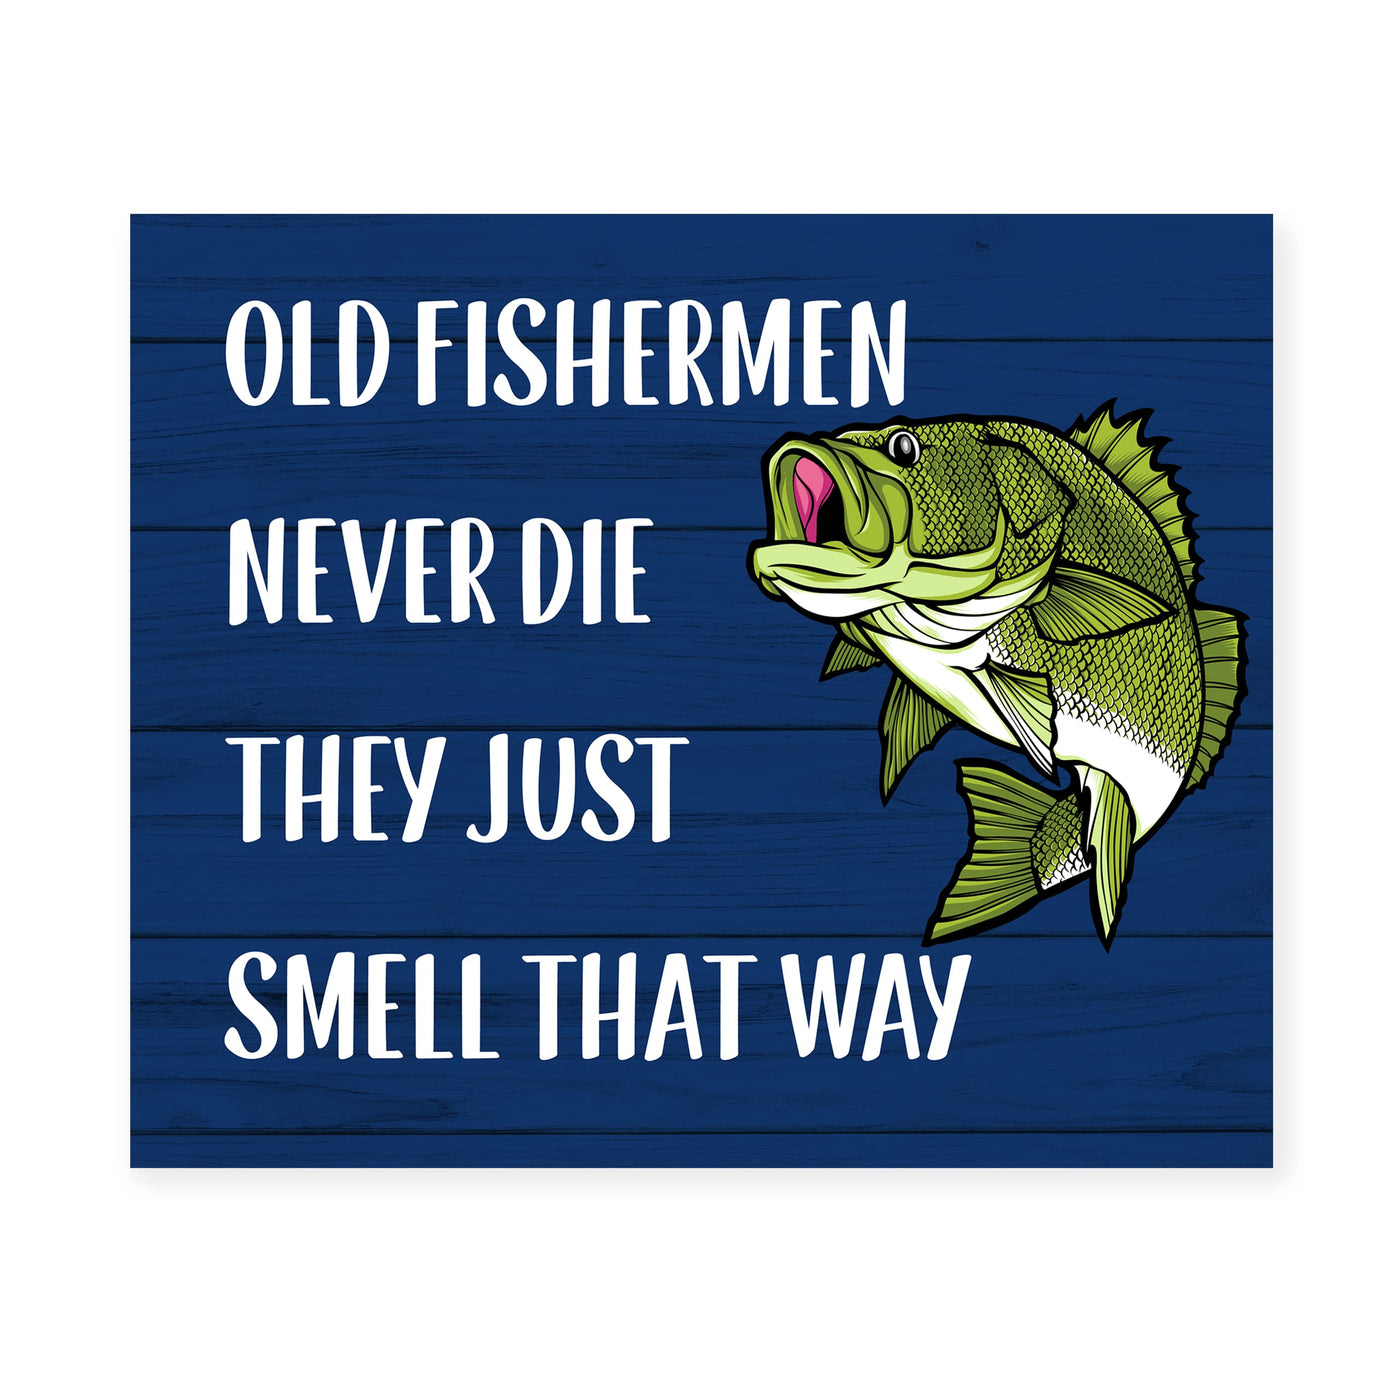 Old Fishermen Never Die-Just Smell That Way-Funny Fishing Wall Sign -10 x 8" Rustic Art Print w/Green Bass Fish Image -Ready to Frame. Home-Cabin-Lodge-Lake House Decor. Printed on Photo Paper.